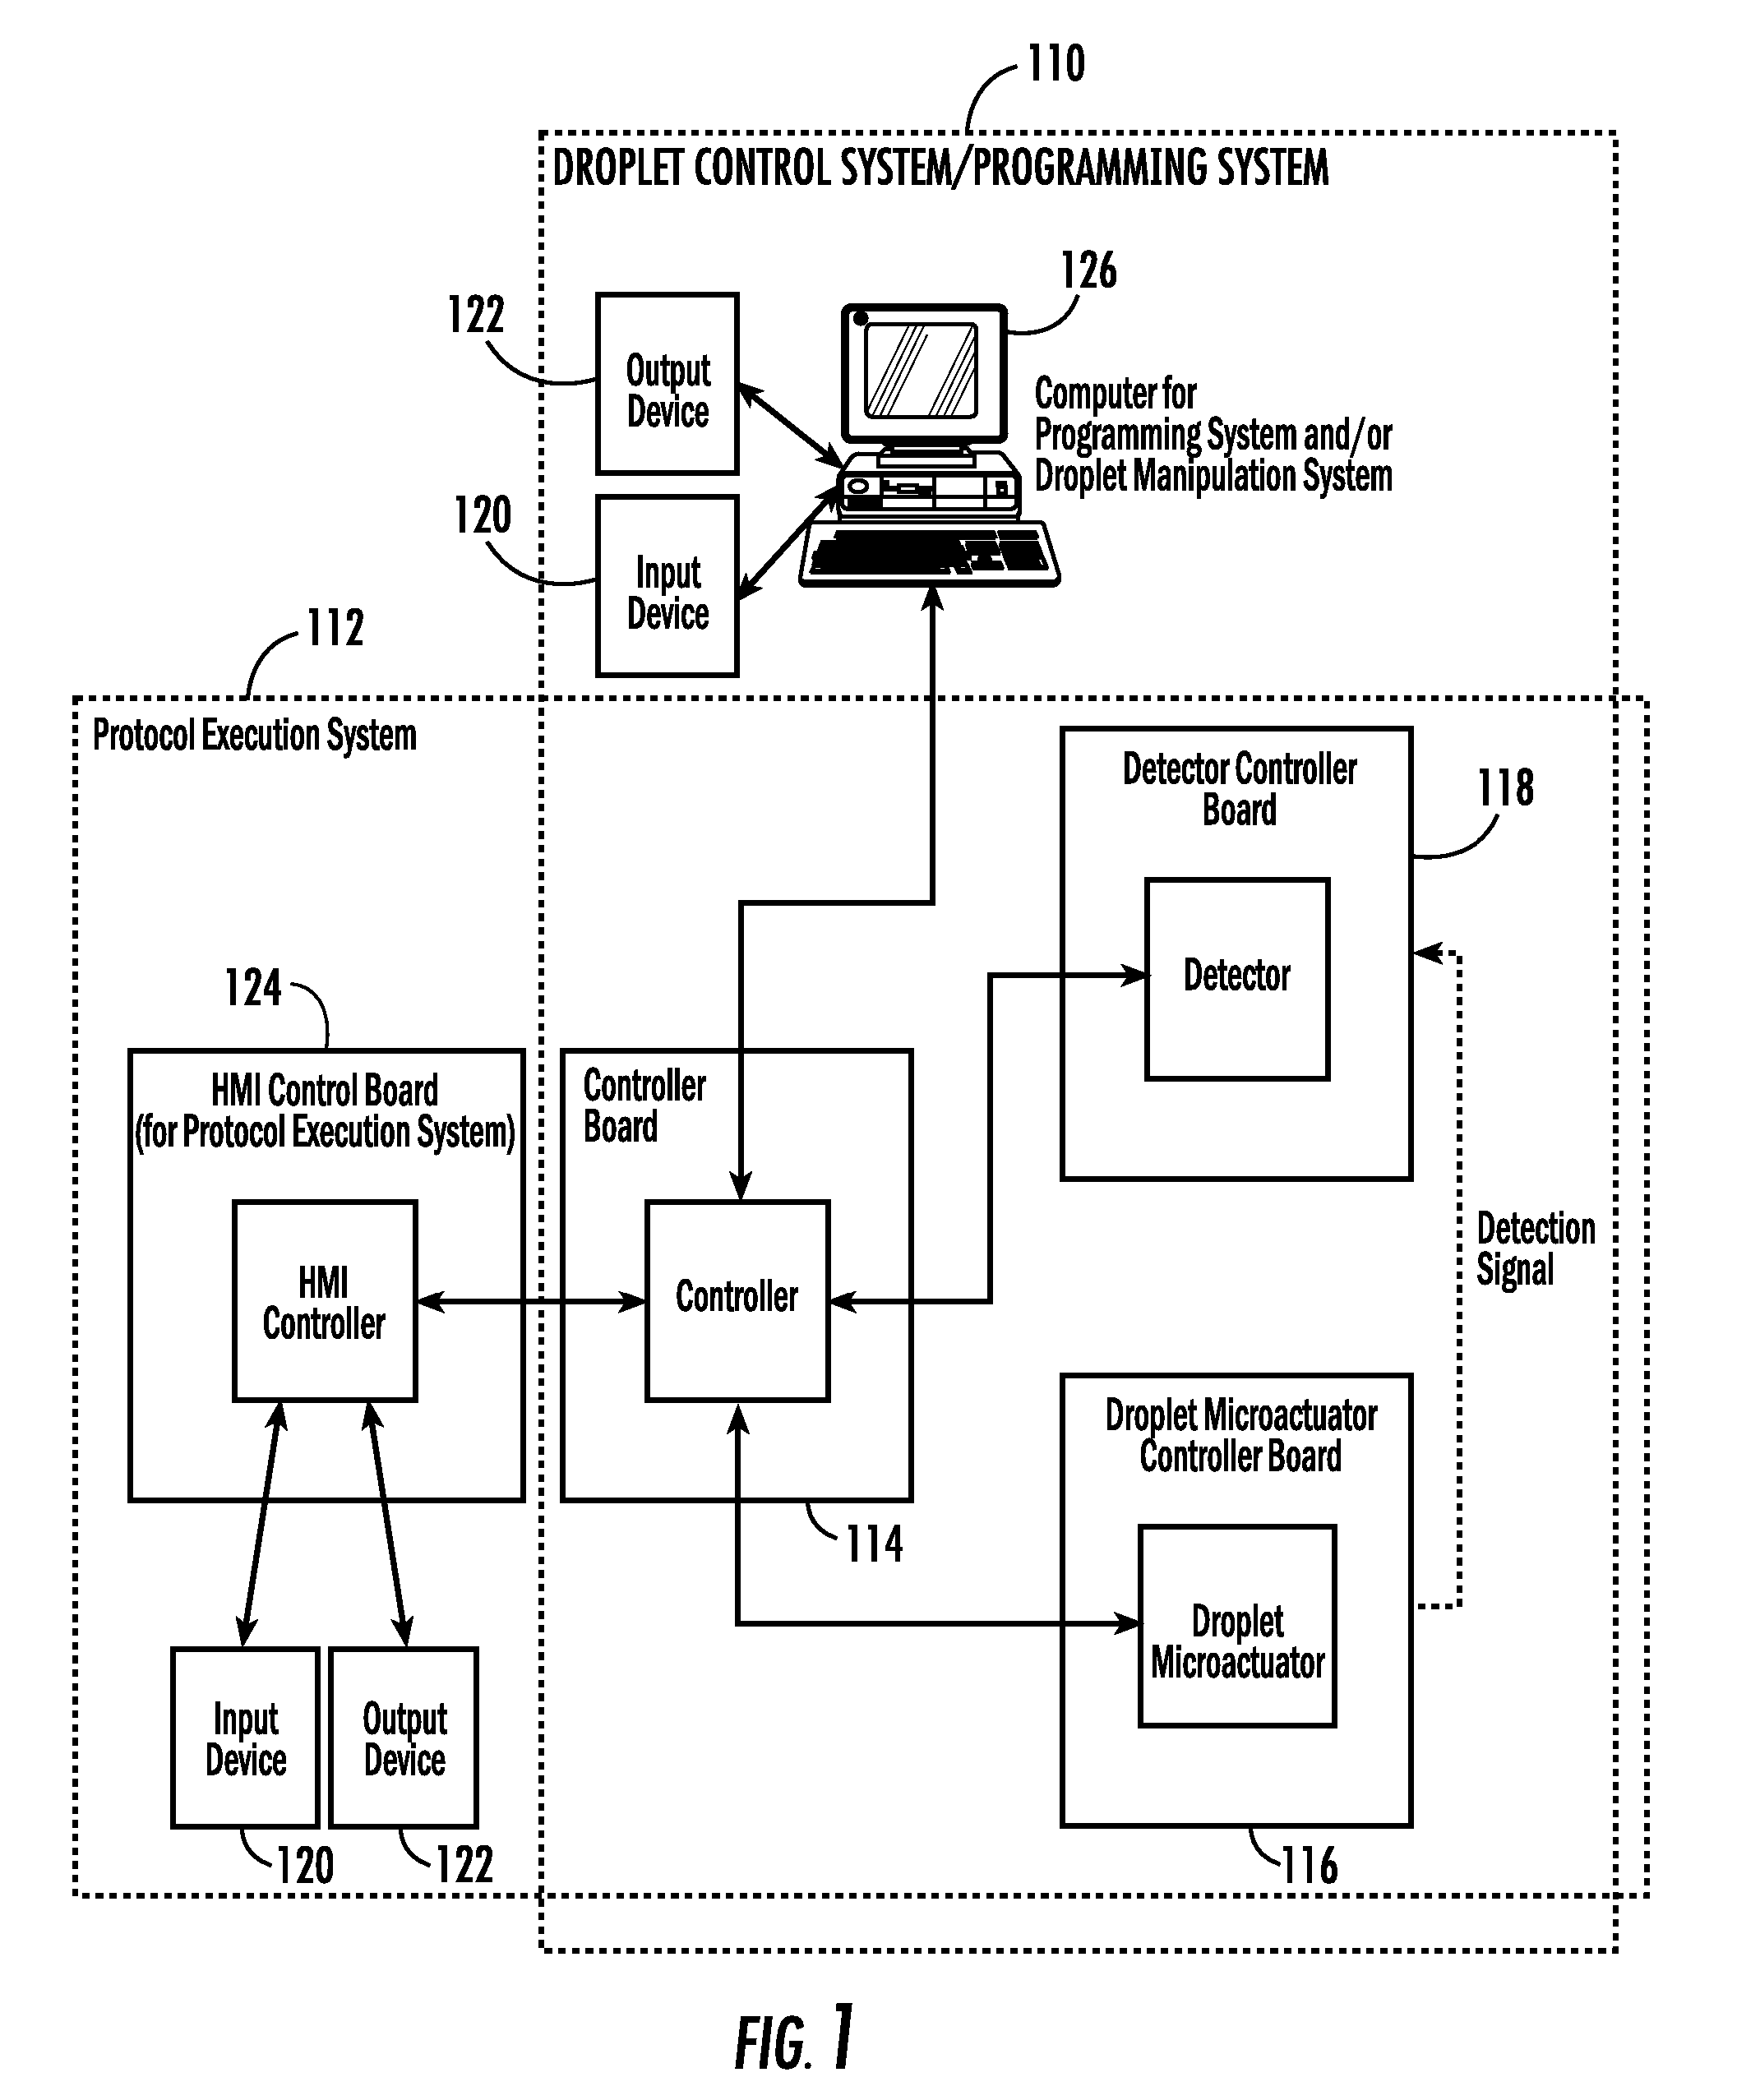 System for Controlling a Droplet Actuator